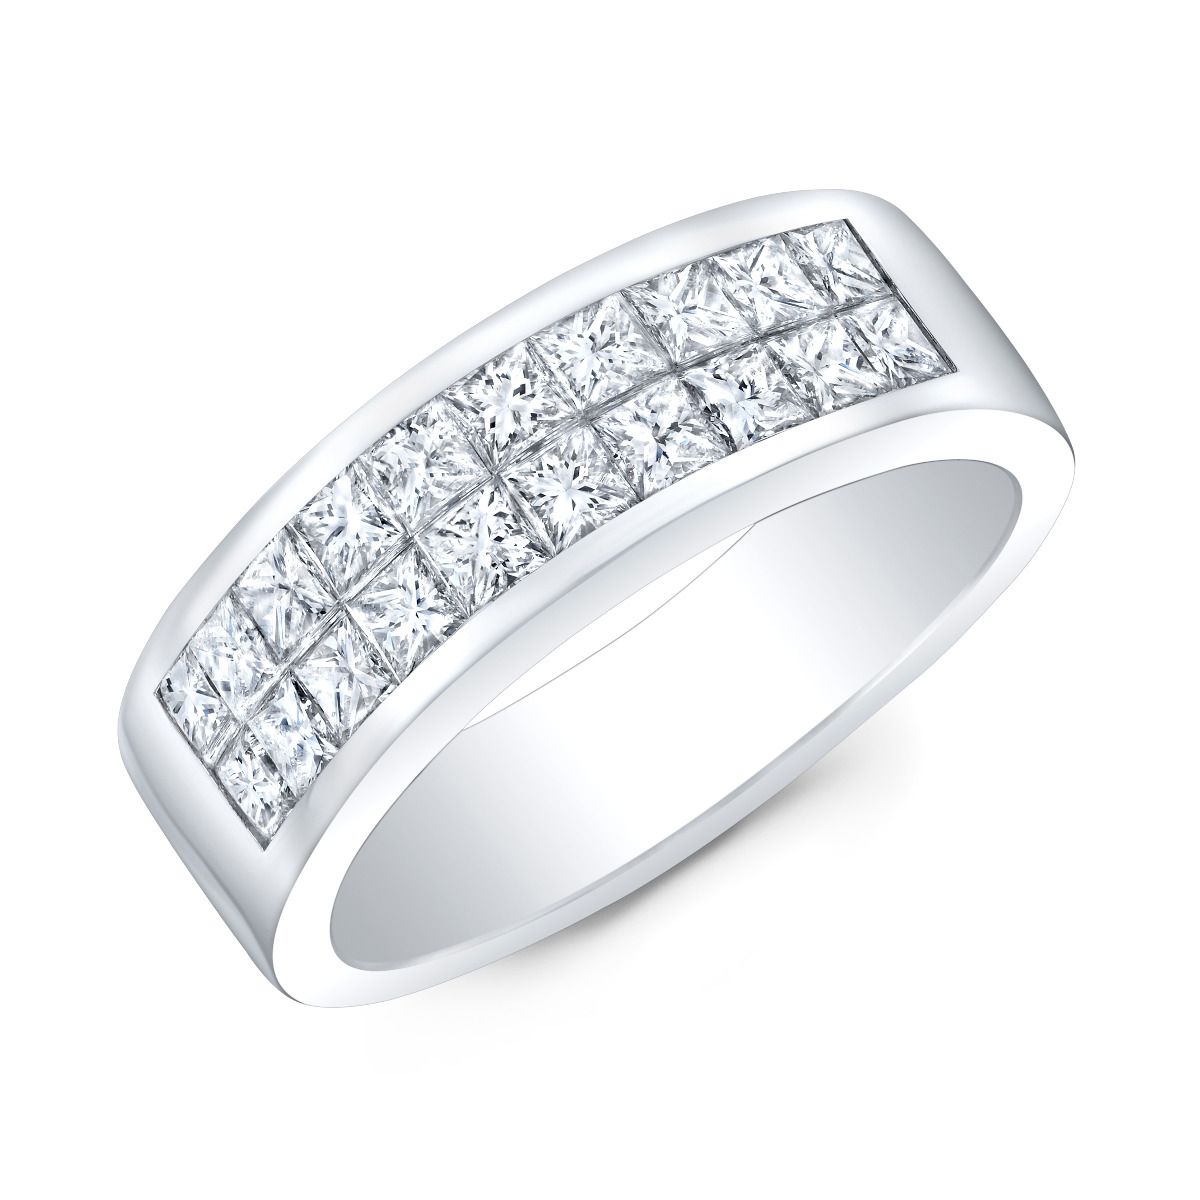 7mm Invisible Princess Cut Men's Ring  in White Gold.